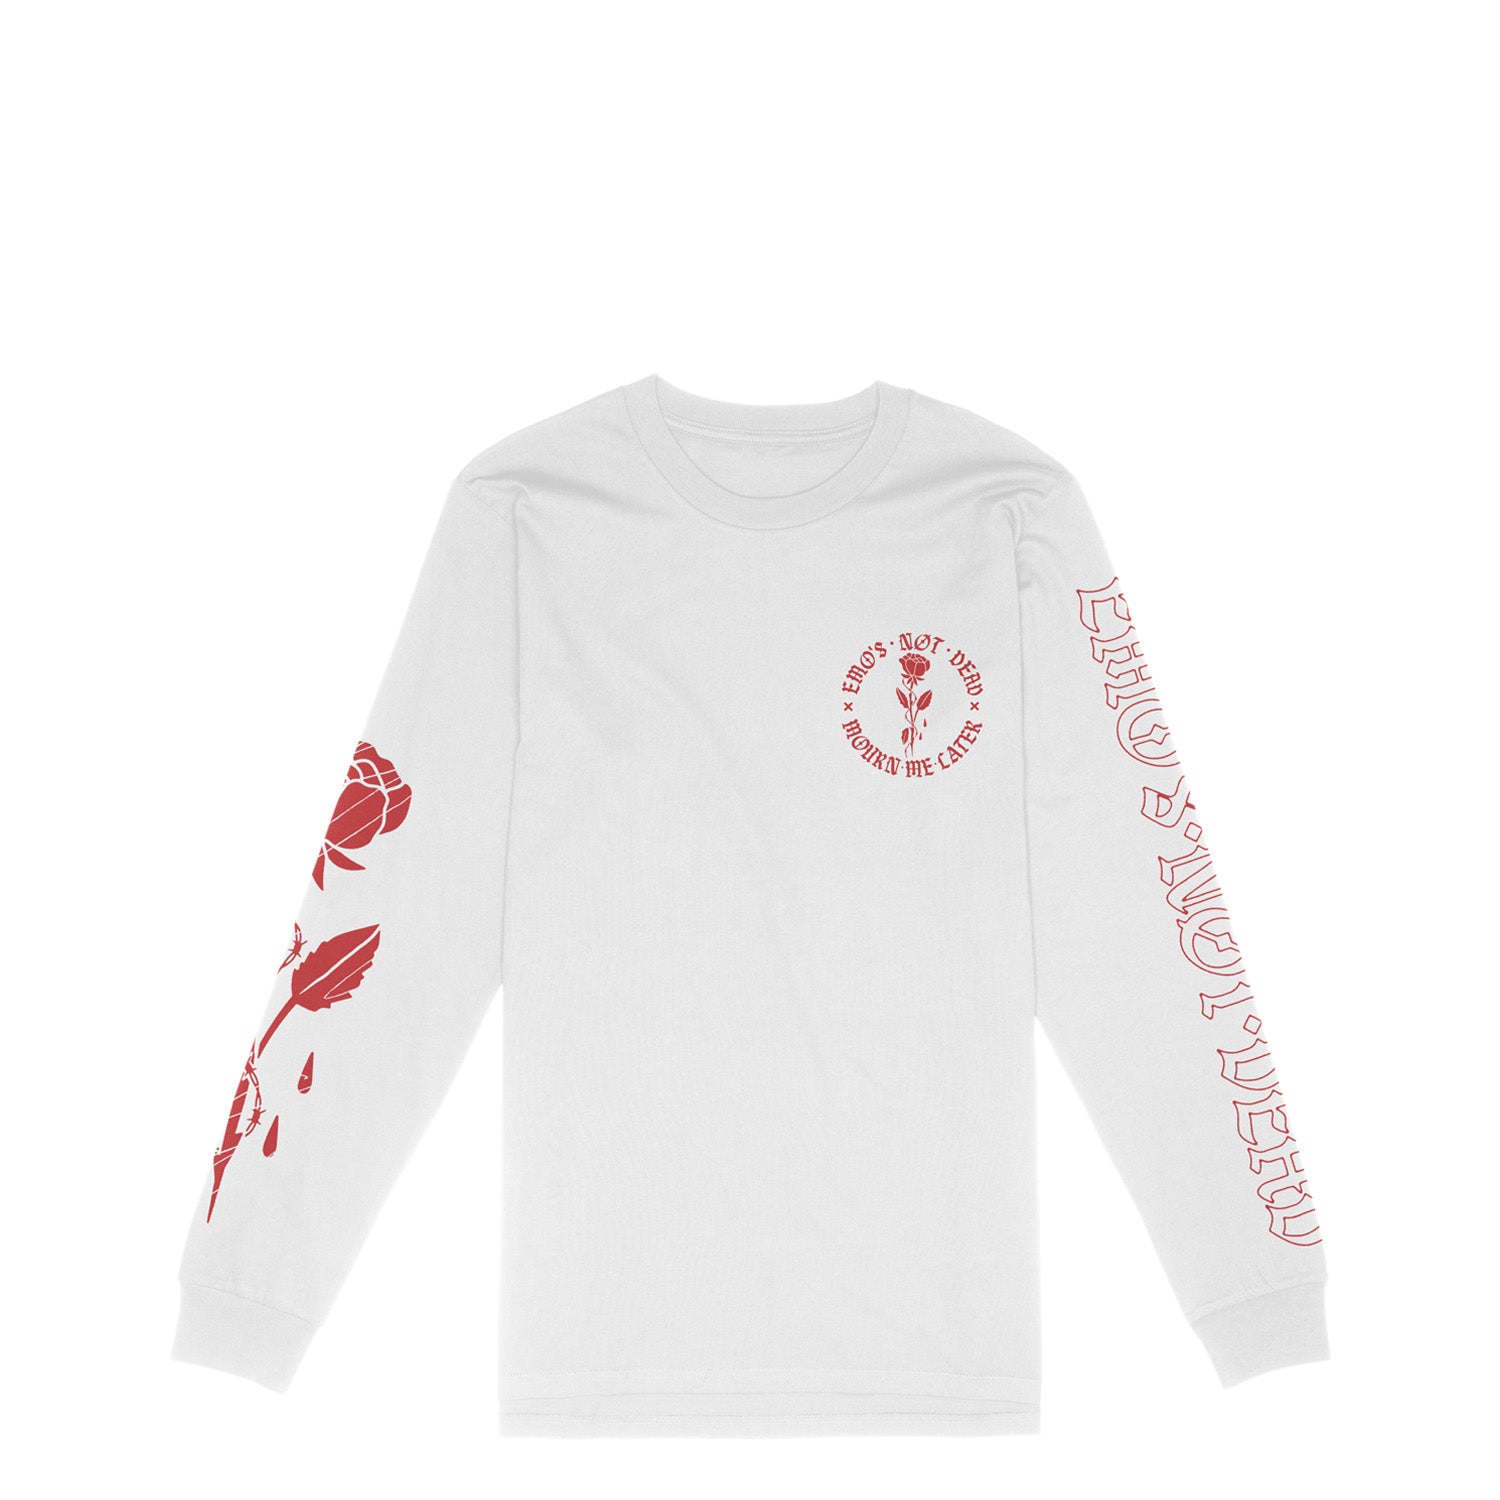 Mourn Me Later Long Sleeve - White